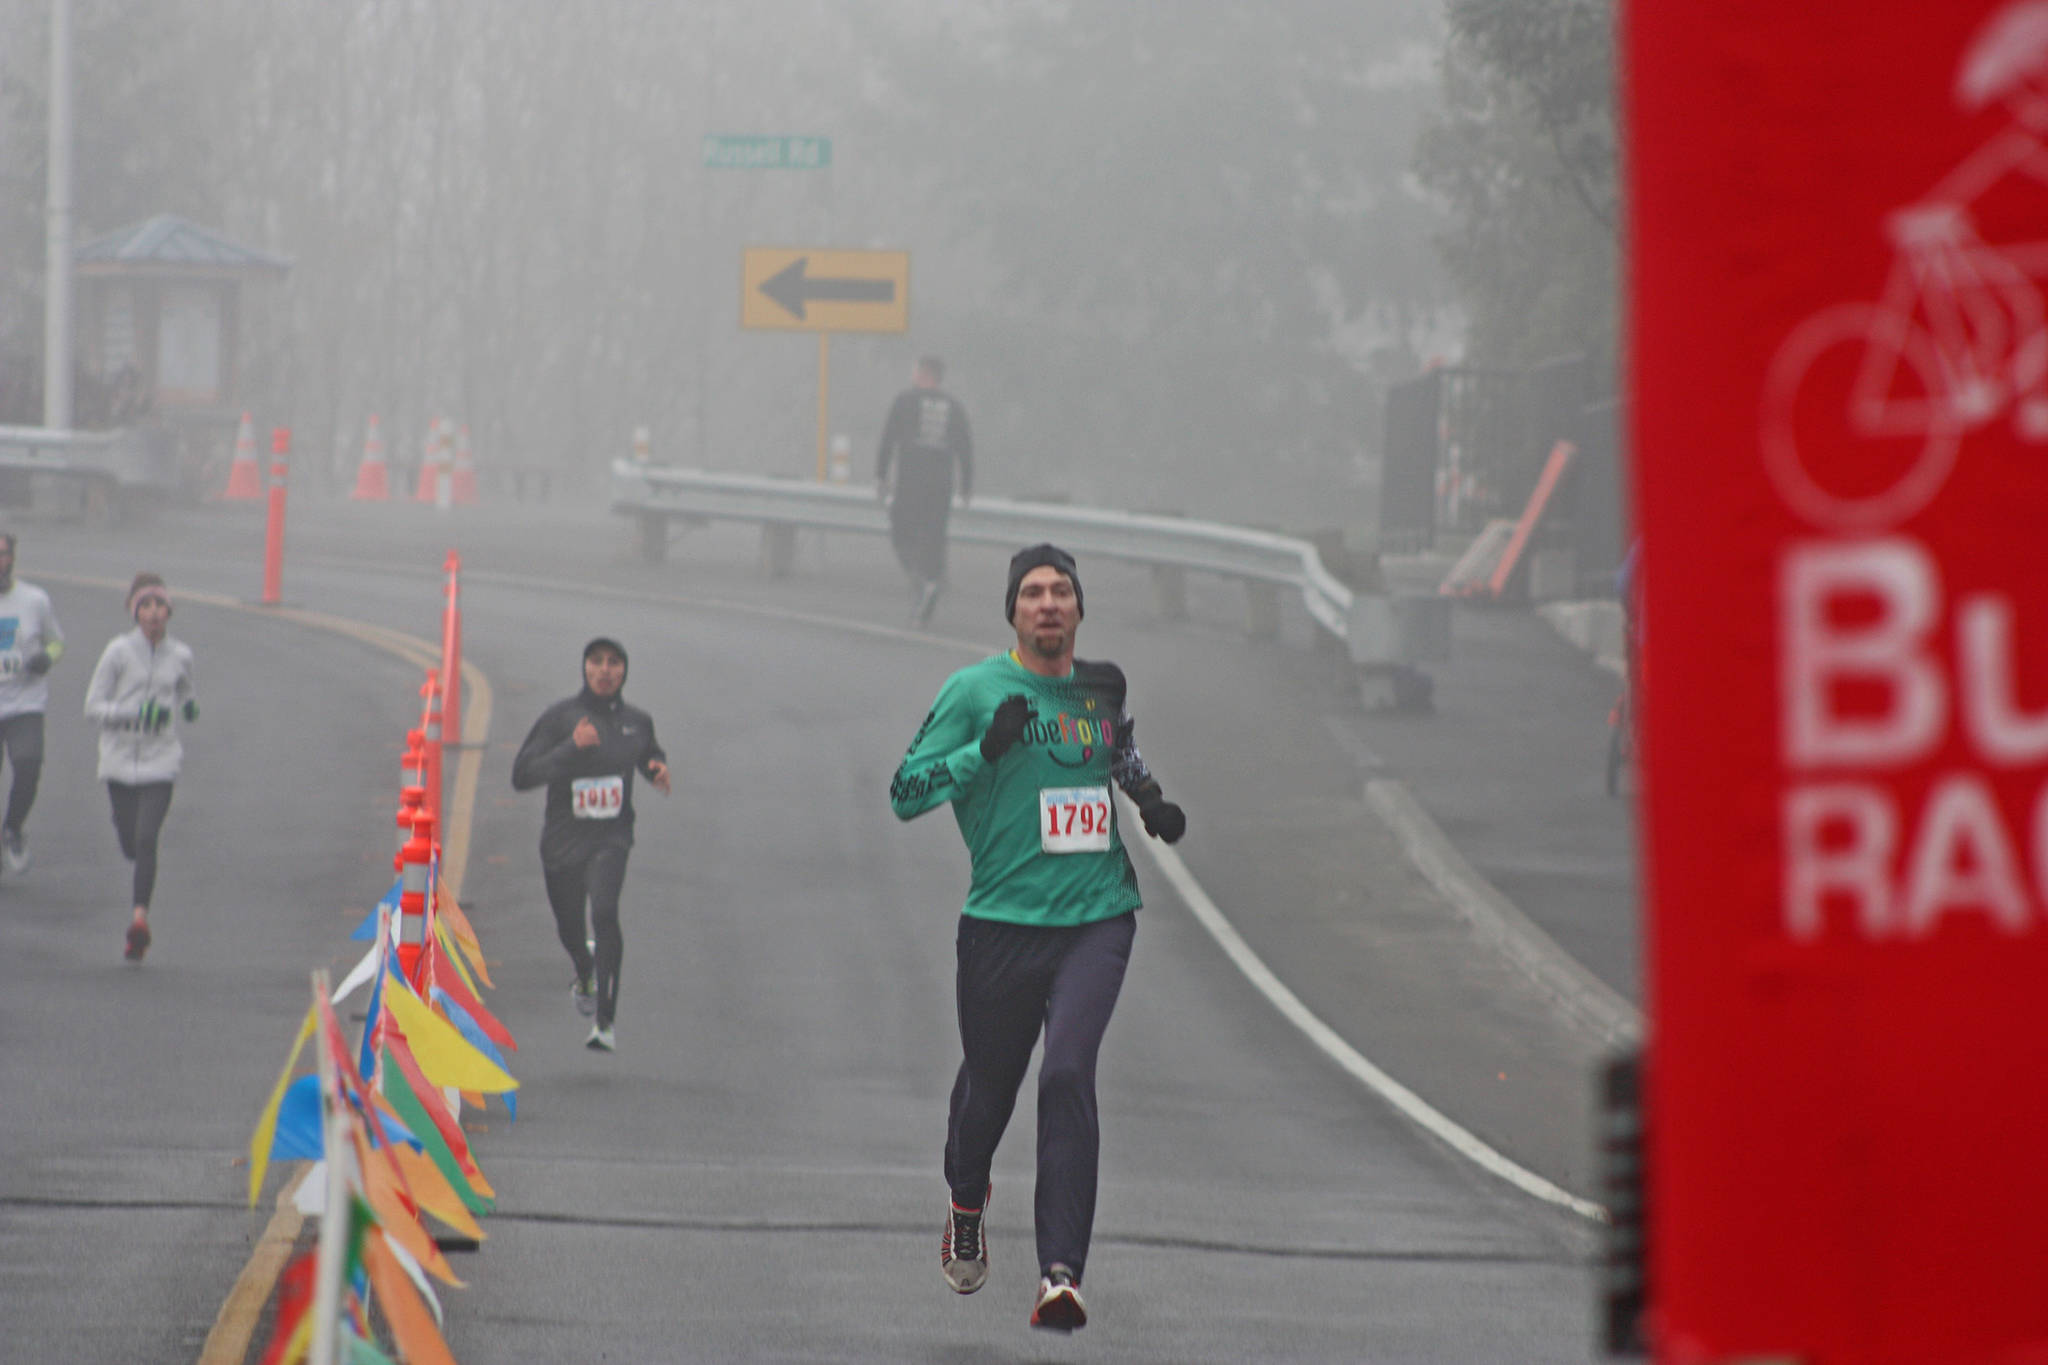 Tacoma’s Ben Mangrum sprints to the finish line to win Kent’s 35th annual Christmas Rush Fun Run at Hogan Park at Russell Road on Saturday. Mangrum completed the 10-kilometer (6.2-mile) course in 34 minutes, 13 seconds. MARK KLAAS, Kent Reporter